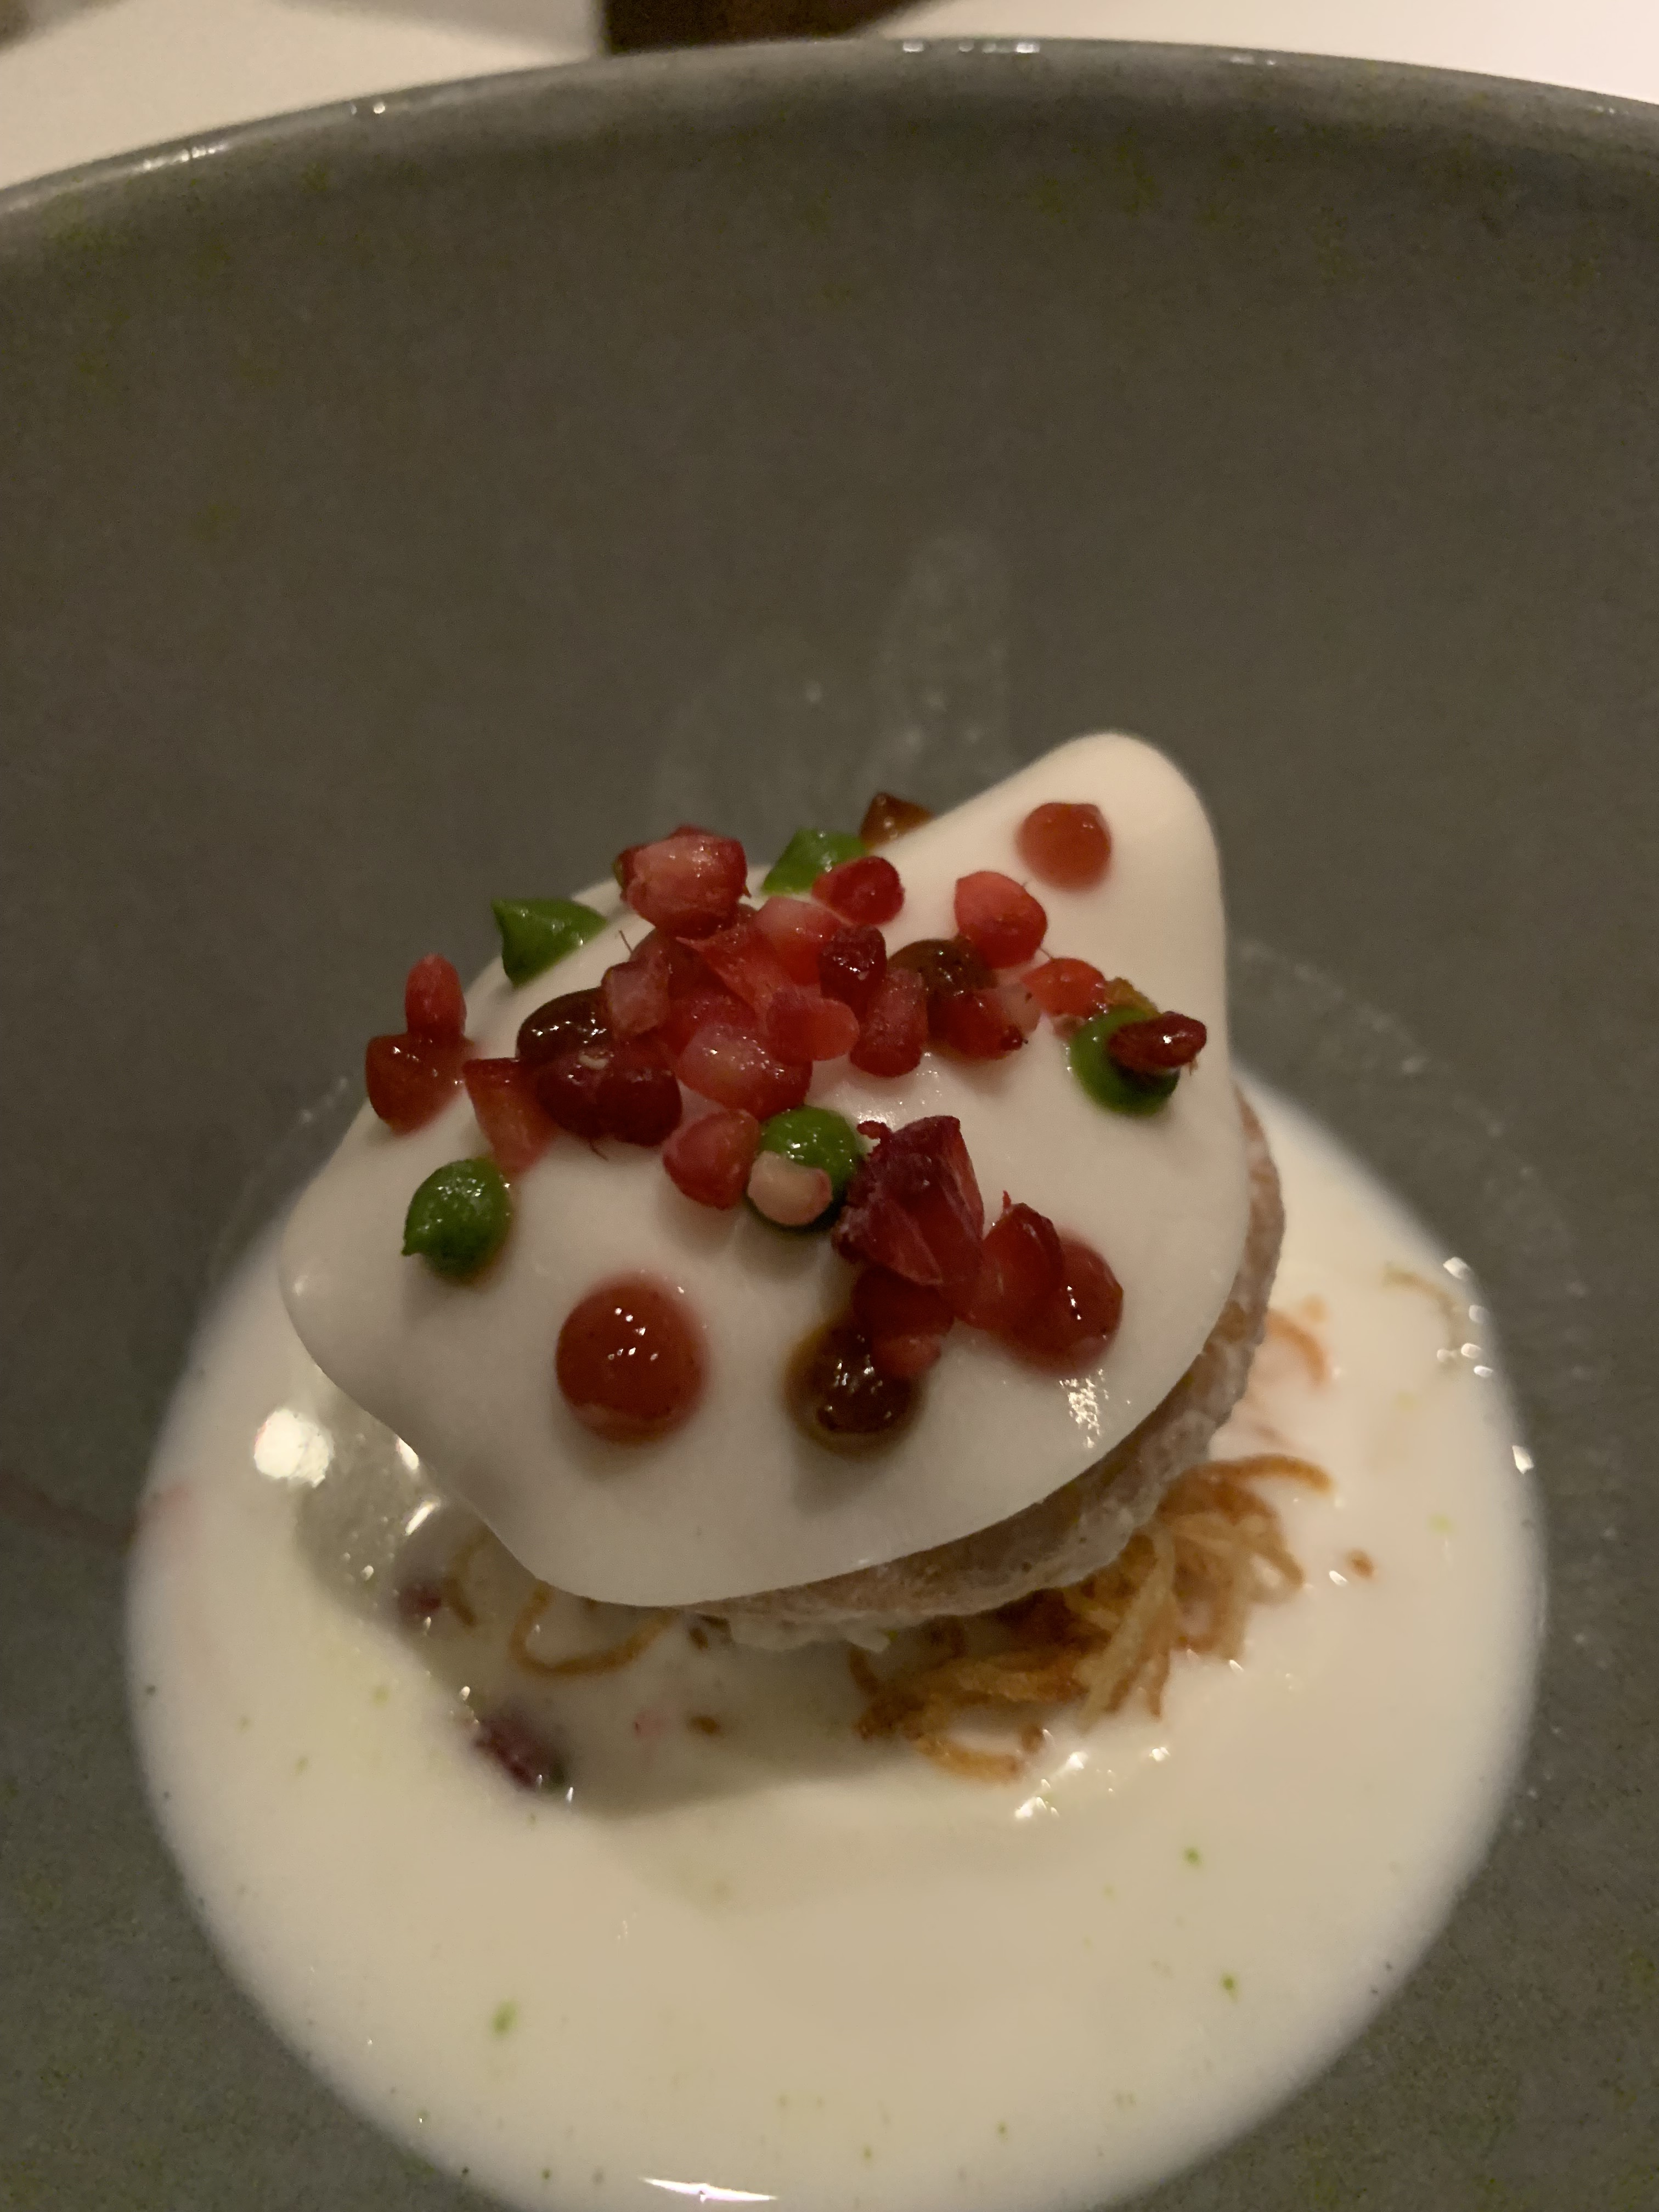 Small dish holding a thin yogurt-based broth, with bits of crispy light-brown tendrils visible below a round pastry topped with a thin, white, shiny gel. Green & red dots of sauce garnish the gel.